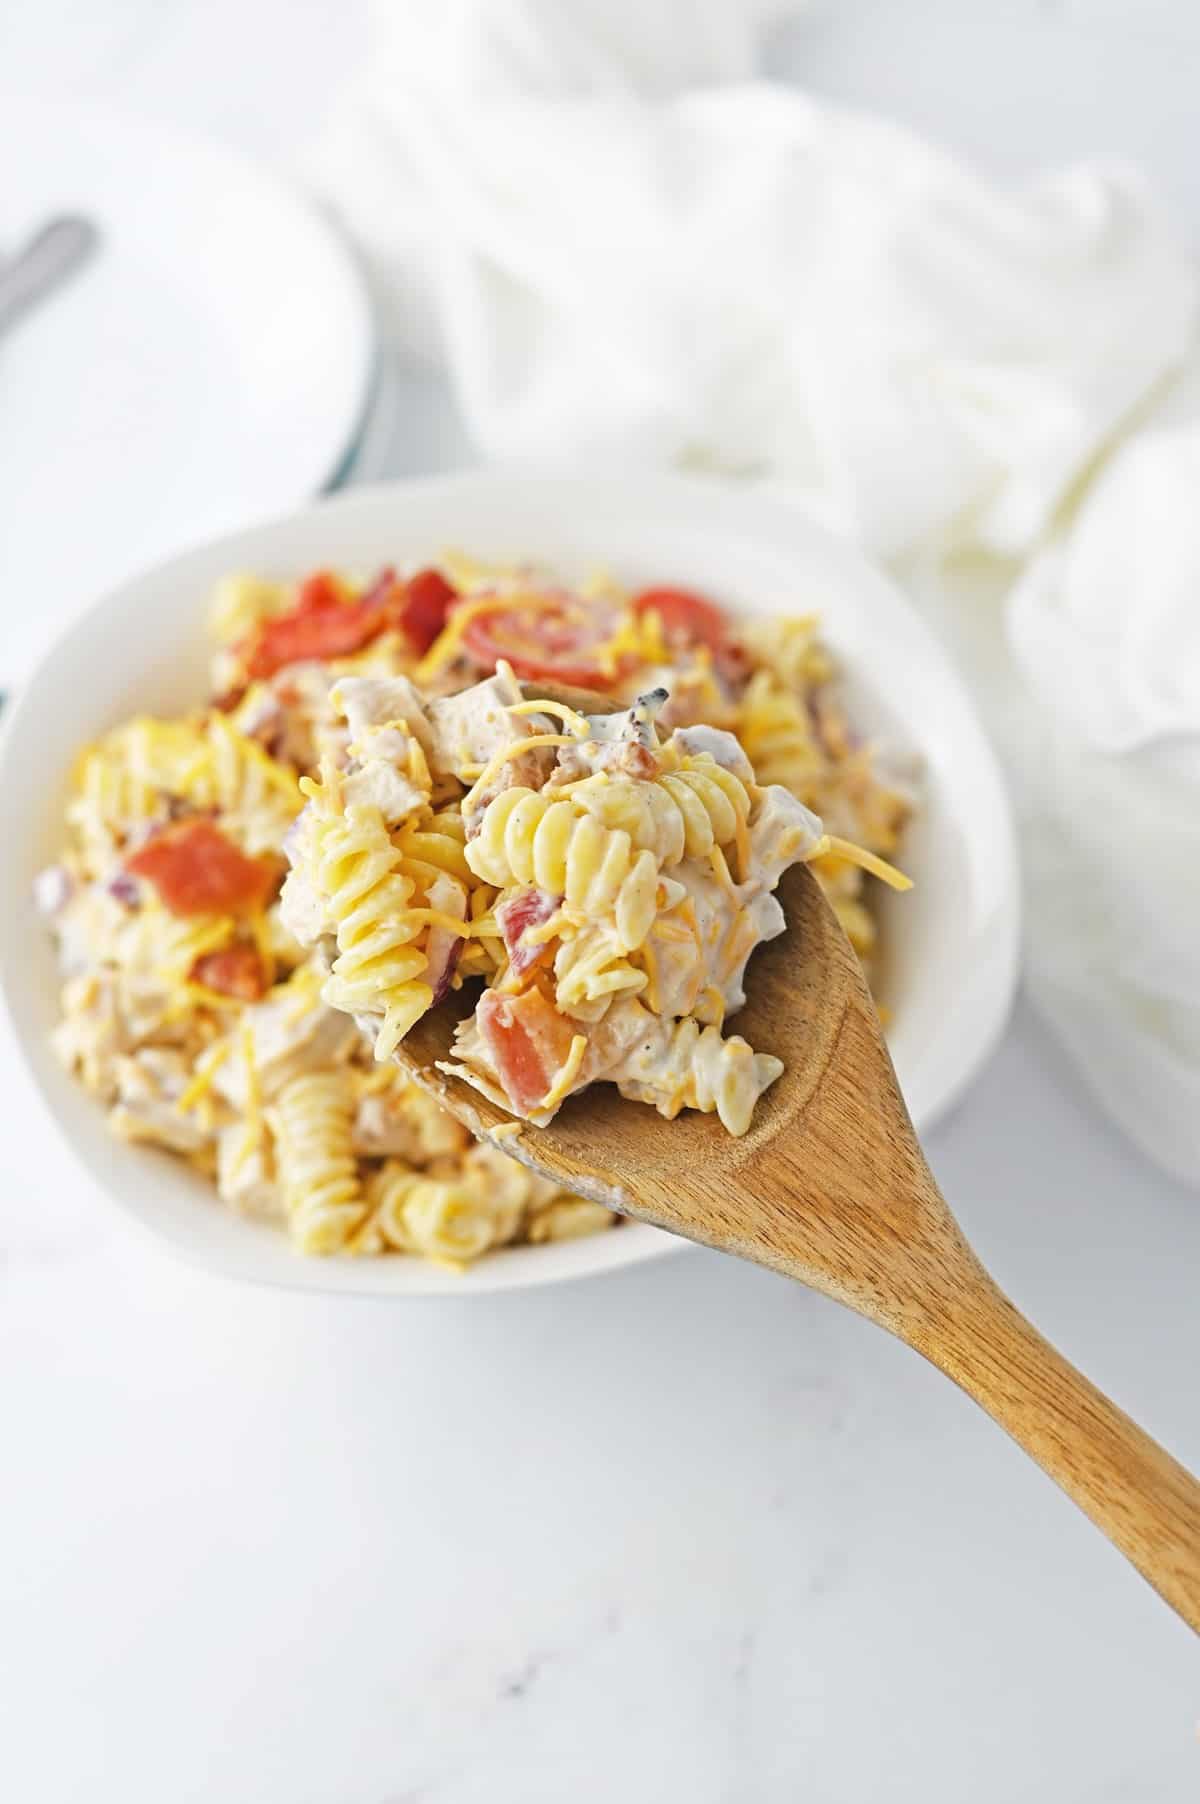 A spoonful of pasta salad with chicken, bacon and tomatoes.